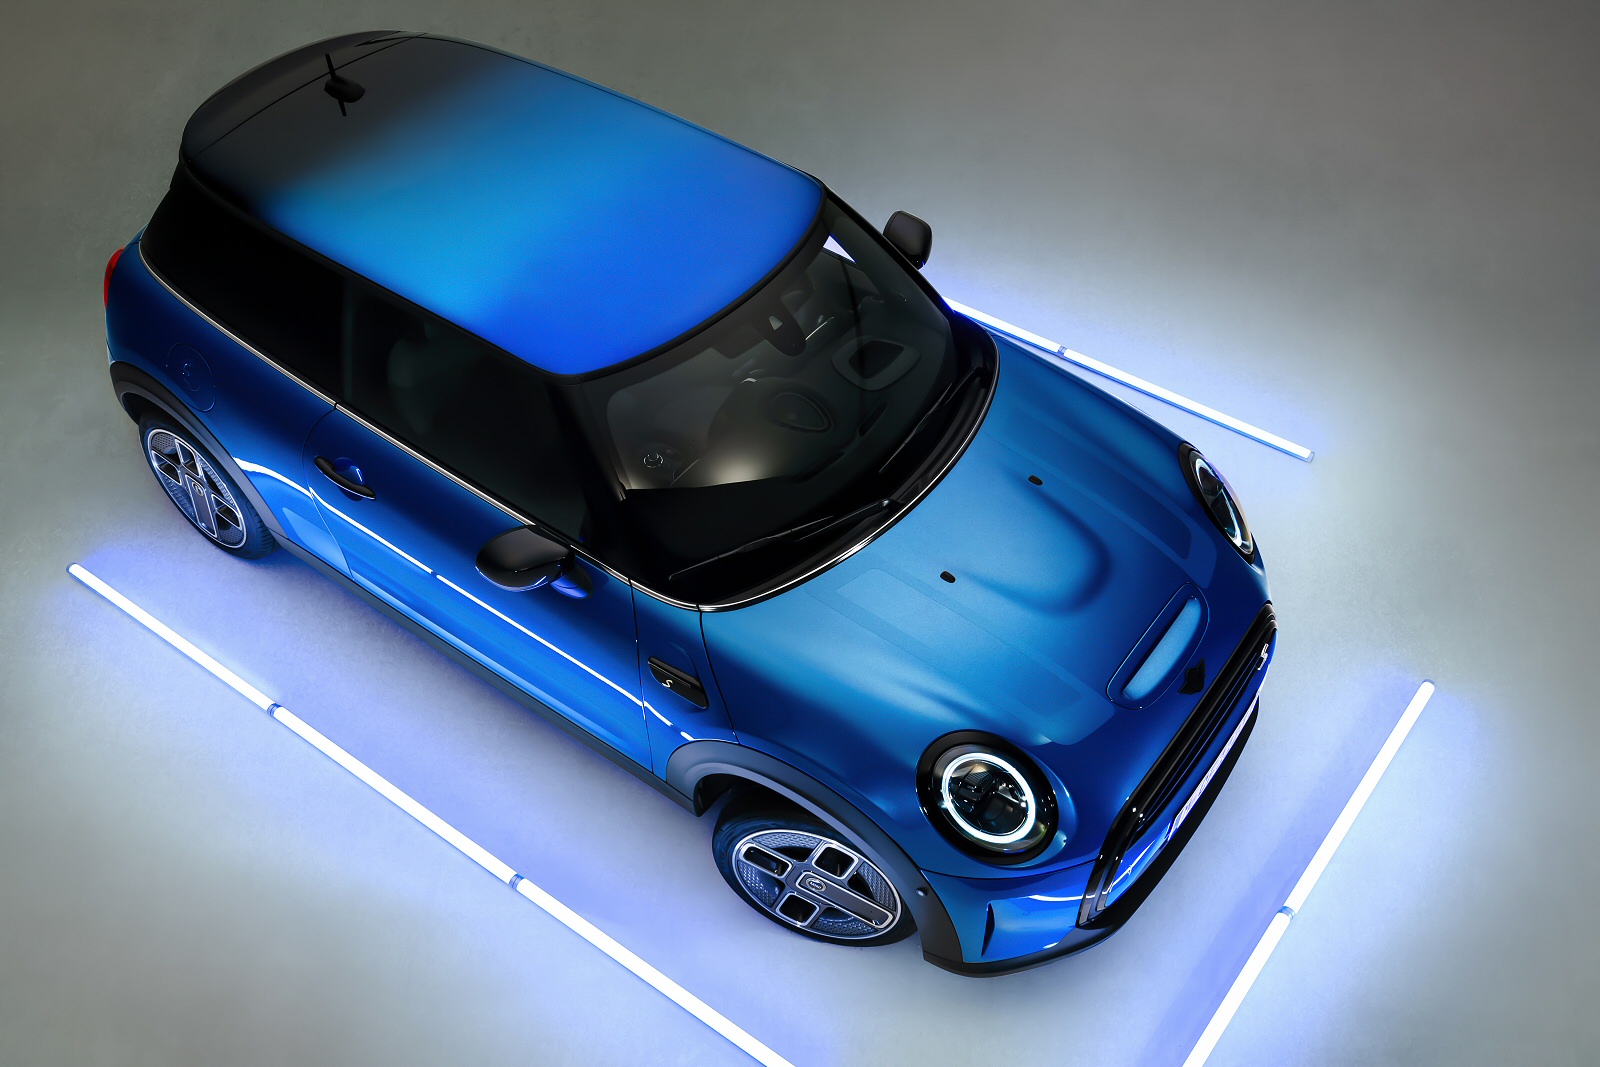 MINI ELECTRIC HATCHBACK 135kW Cooper S Level 2 33kWh 3dr Auto